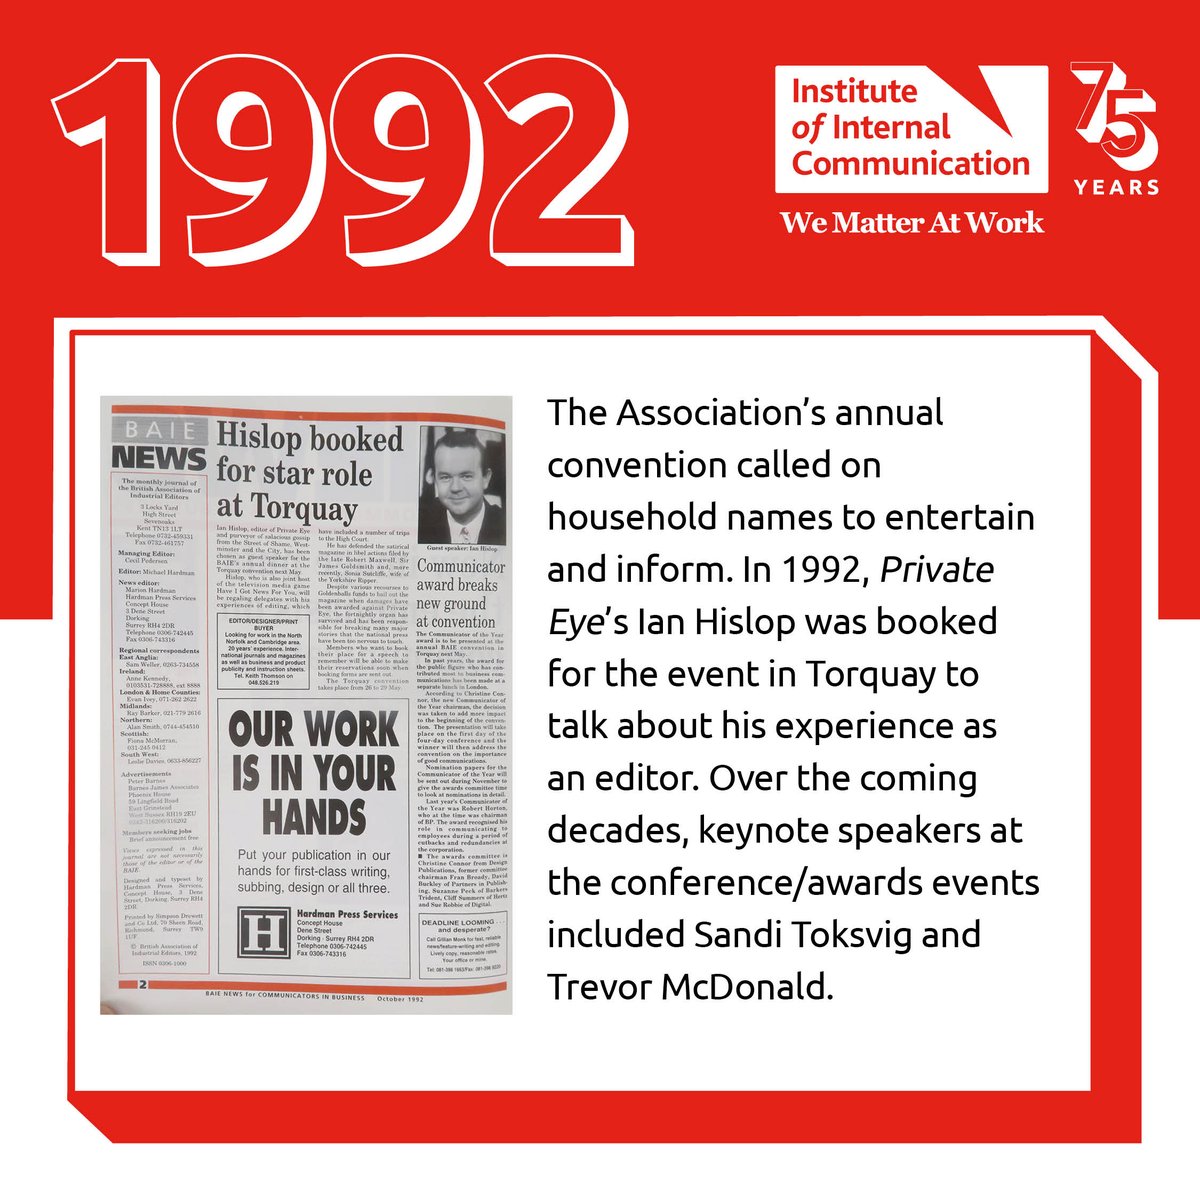 The Association's annual convention called on household names to entertain and inform. In 1992 Private Eye's Ian Hislop was booked for the event in Torquay to talk about his experience as an editor. Find out more| ow.ly/u7ZP50QOR7I #IoIC75